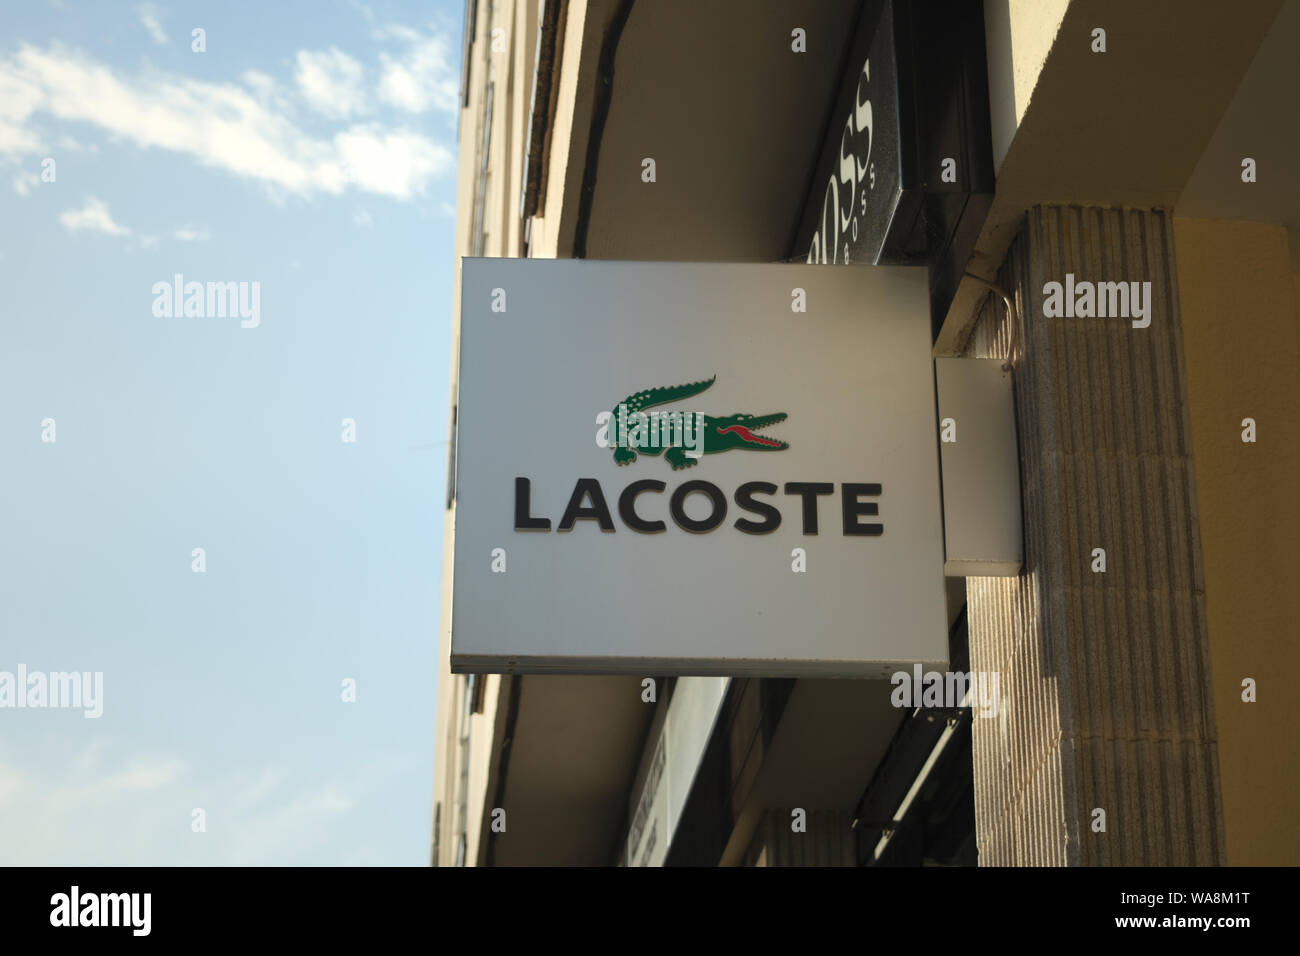 Store sign of lacoste logo on an old building's facade in Spain Stock Photo